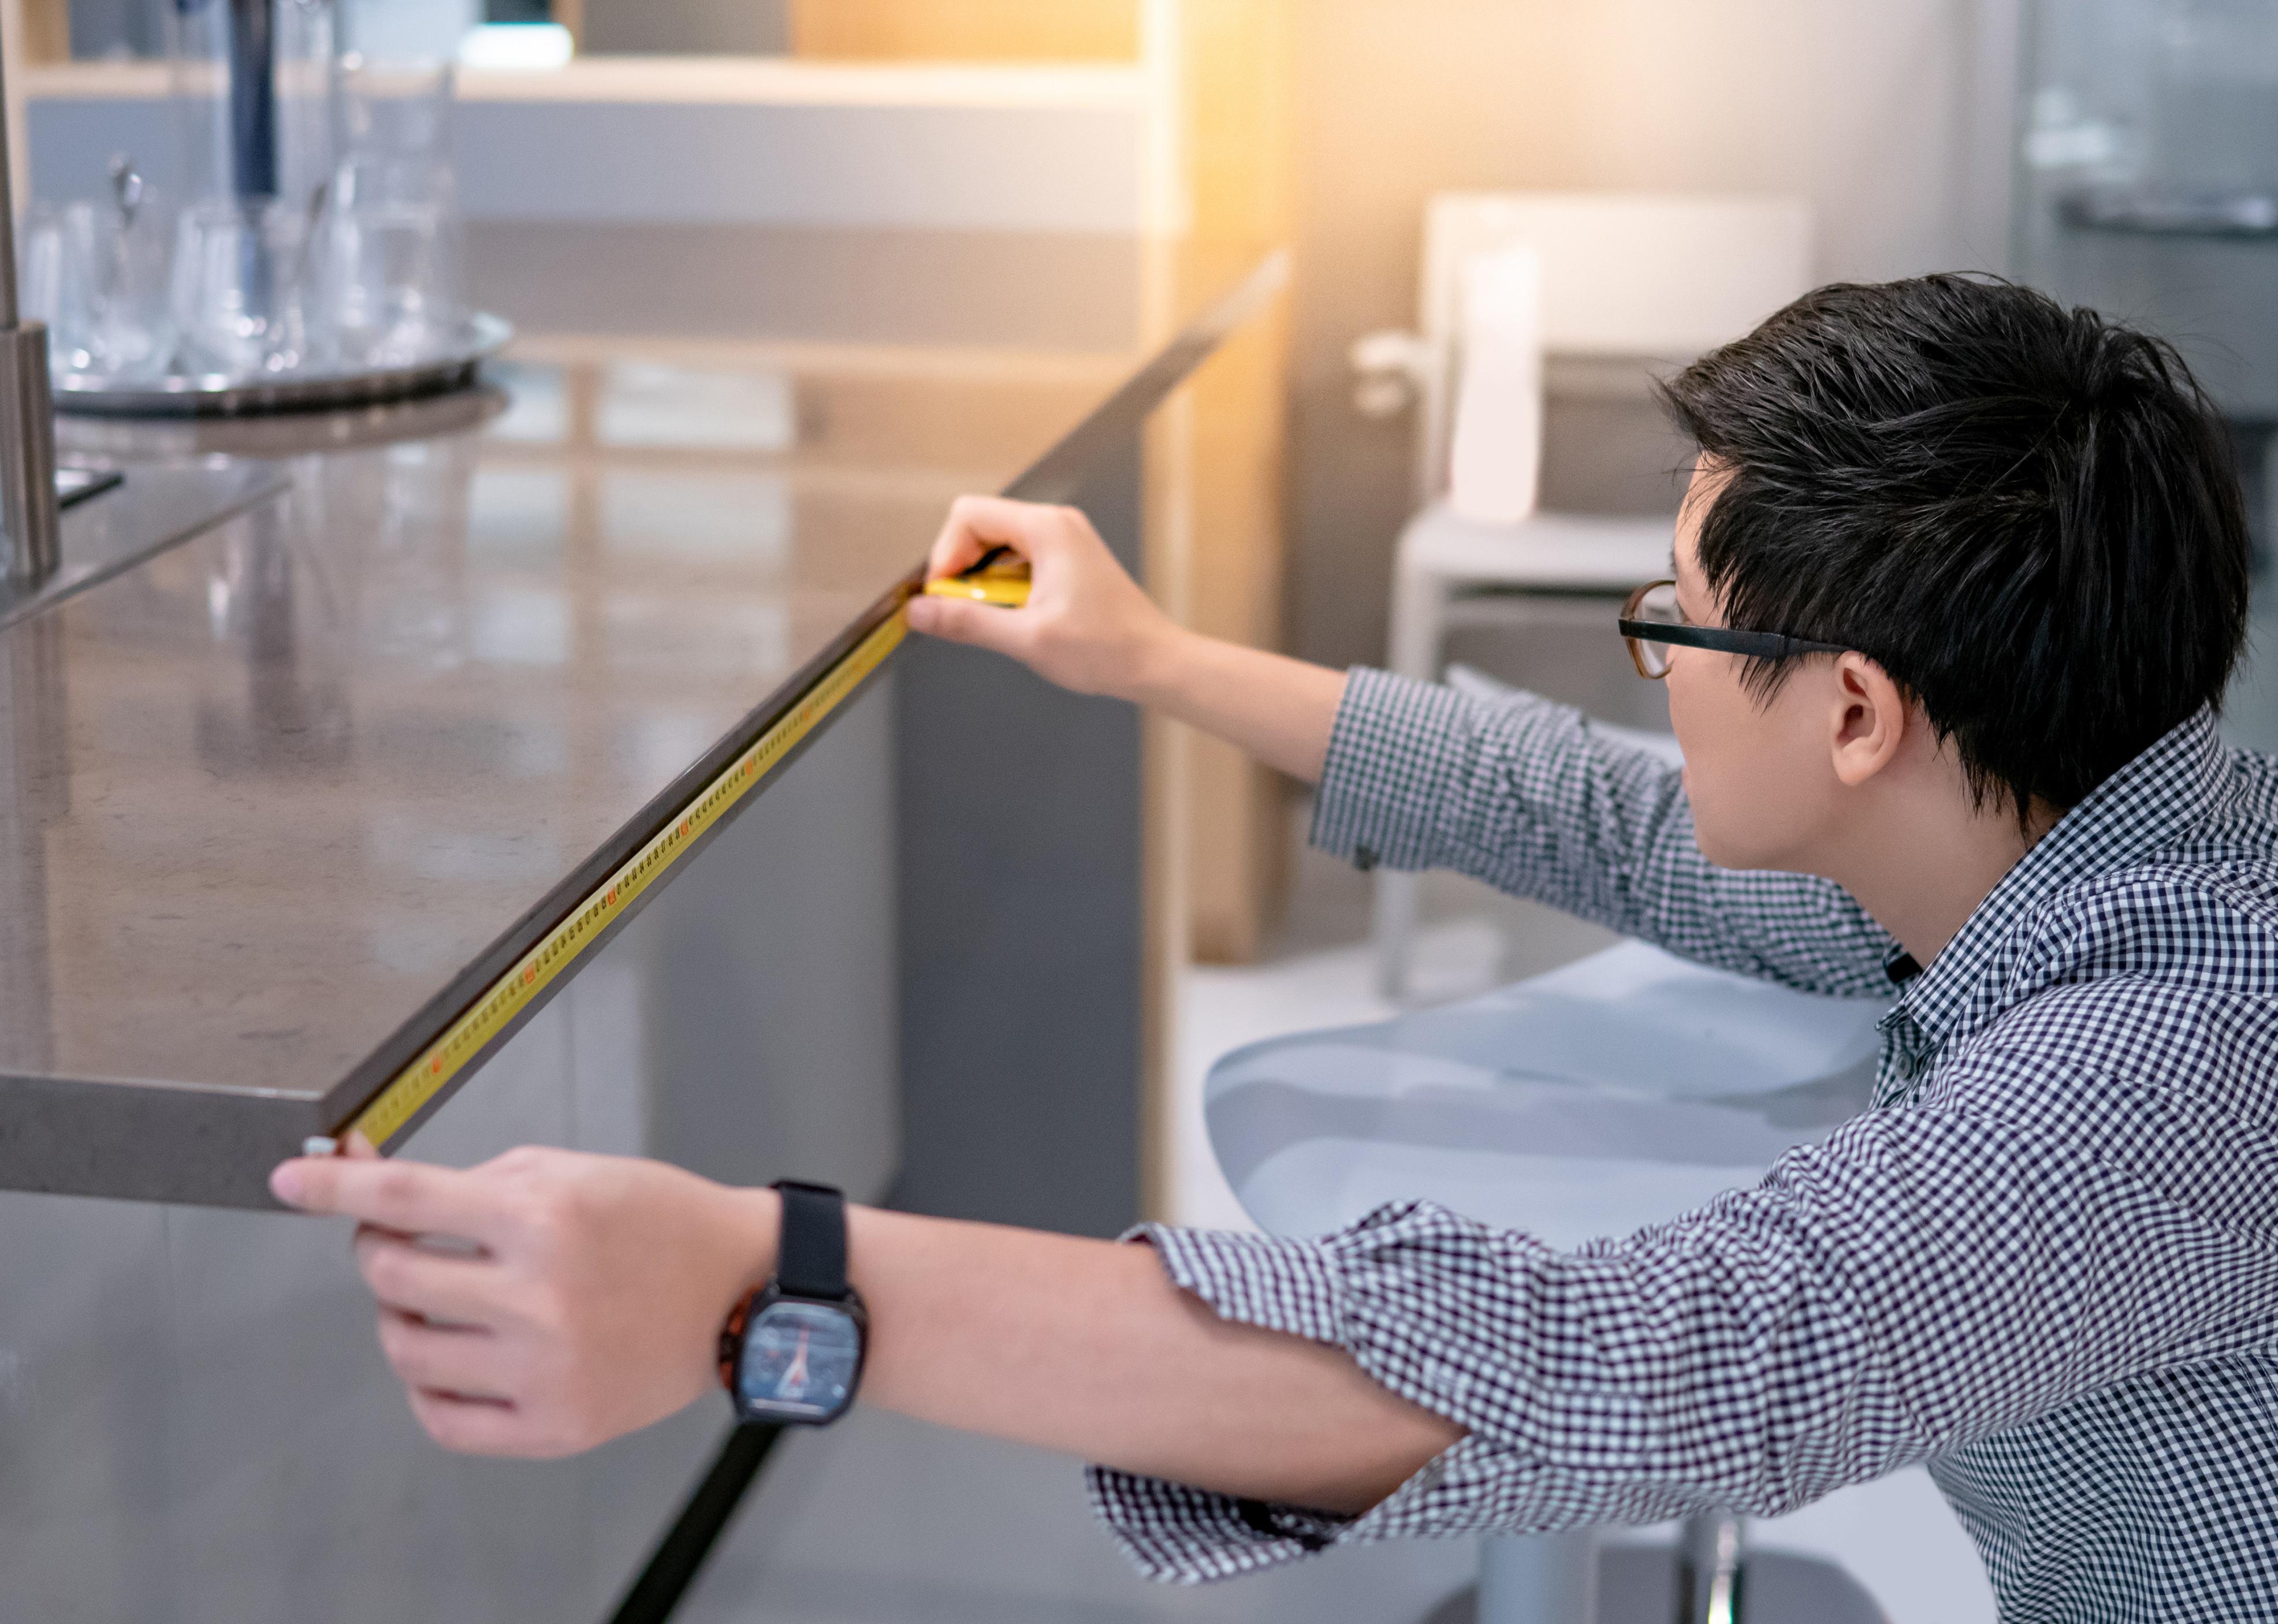 A person measures a kitchen countertop with a tape measure.